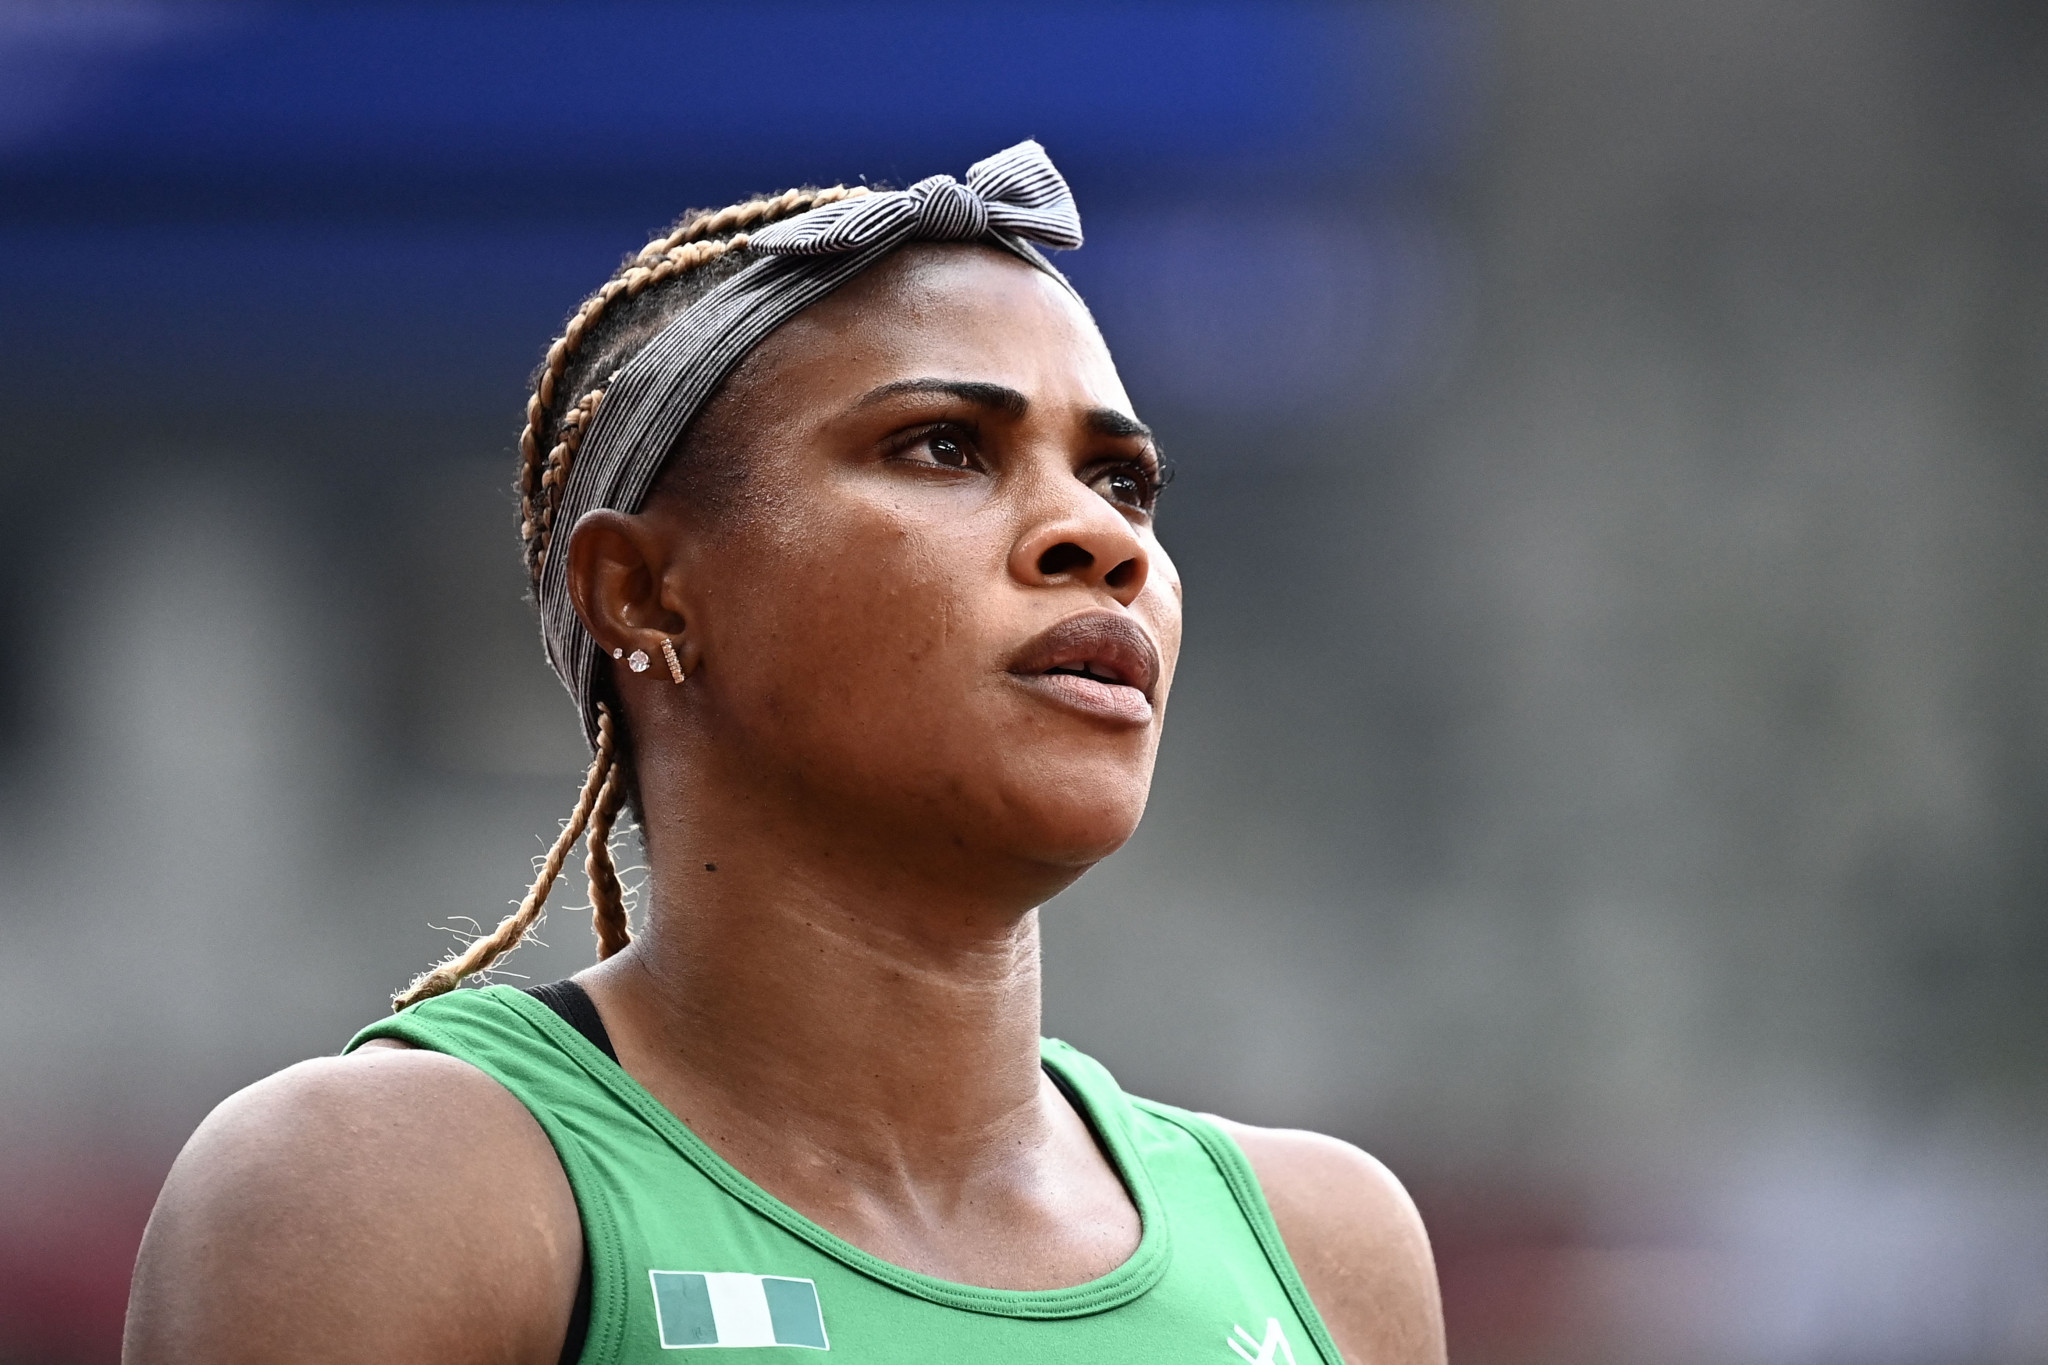 Nigerian sprinter Okagbare ruled out of Tokyo 2020 after positive drugs test